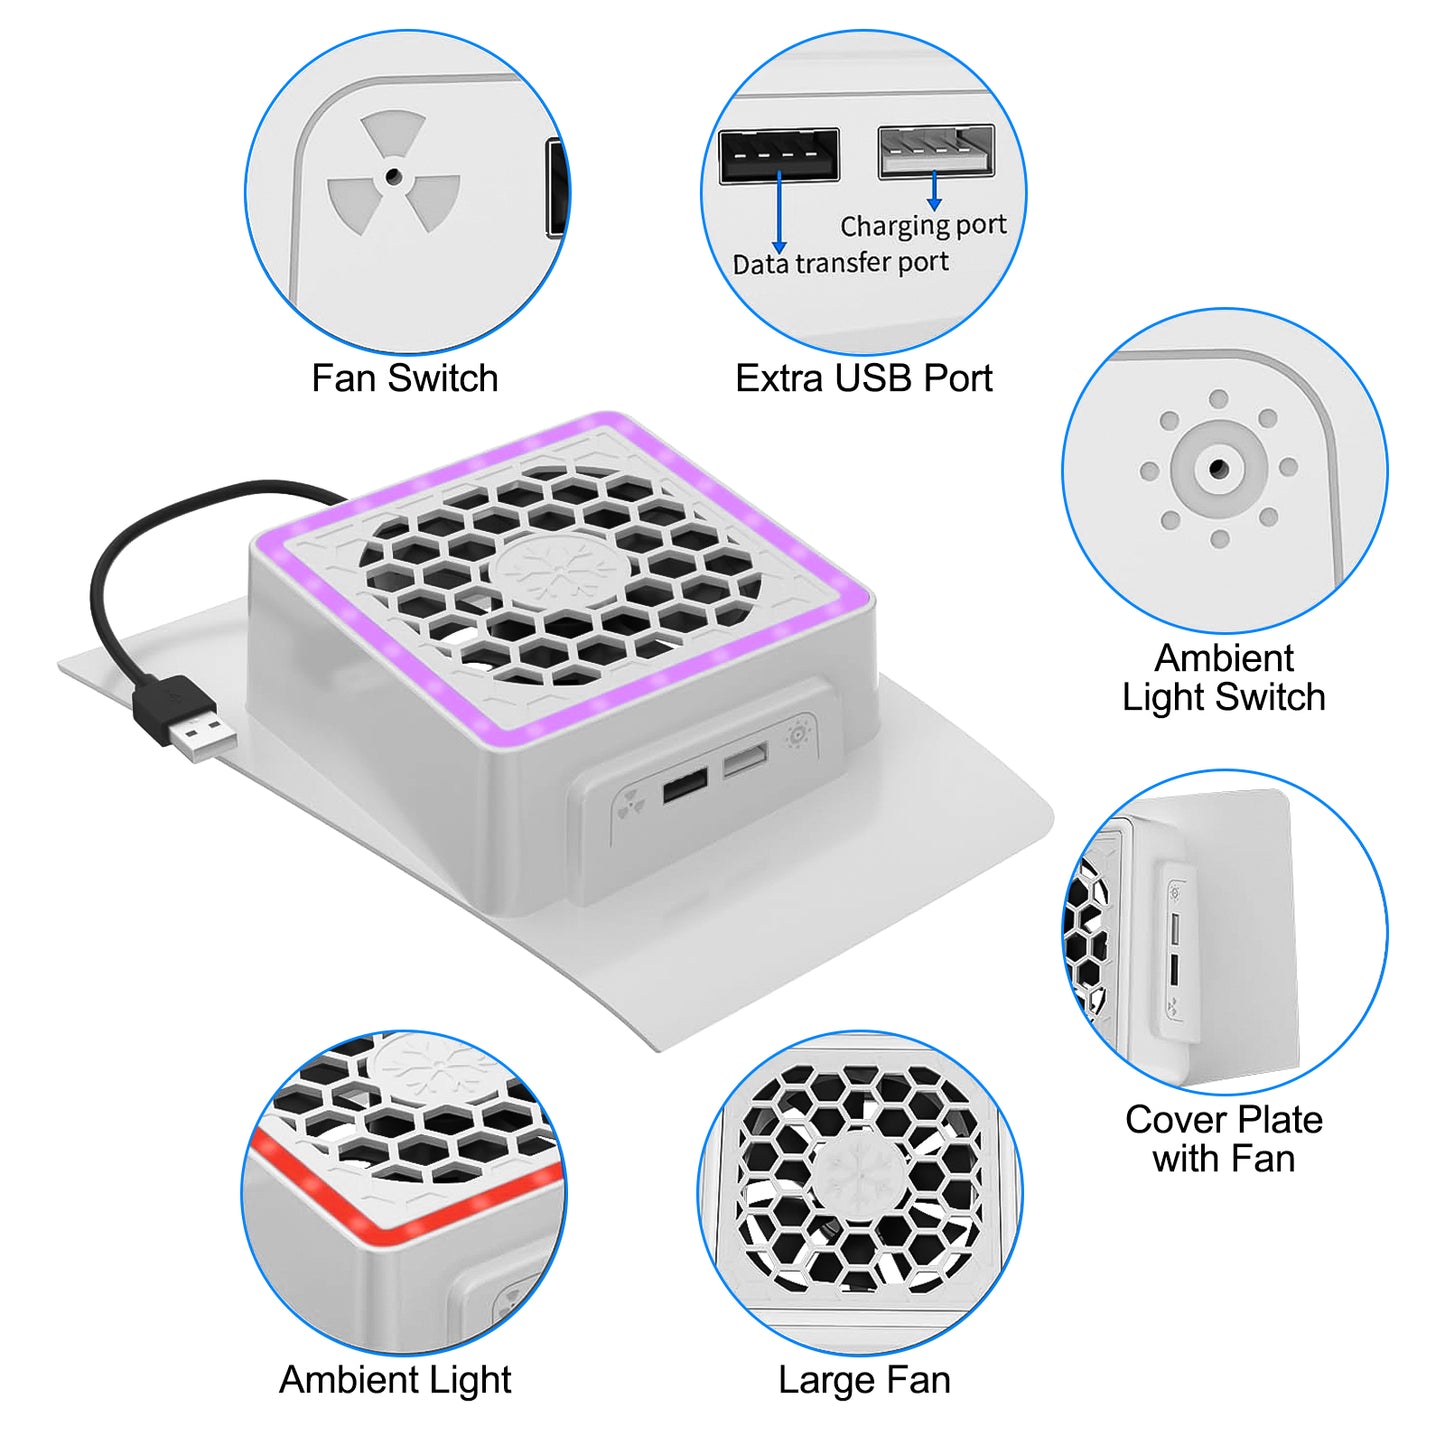 Cooling Fan fit for PS5 Slim Cooling System with RGB LED Lights and Plate Cover - Enhanced Cooler Fan with 3-Speed Adjust and Dual USB Ports for PS5 Slim Digital and Disc Edition (White)